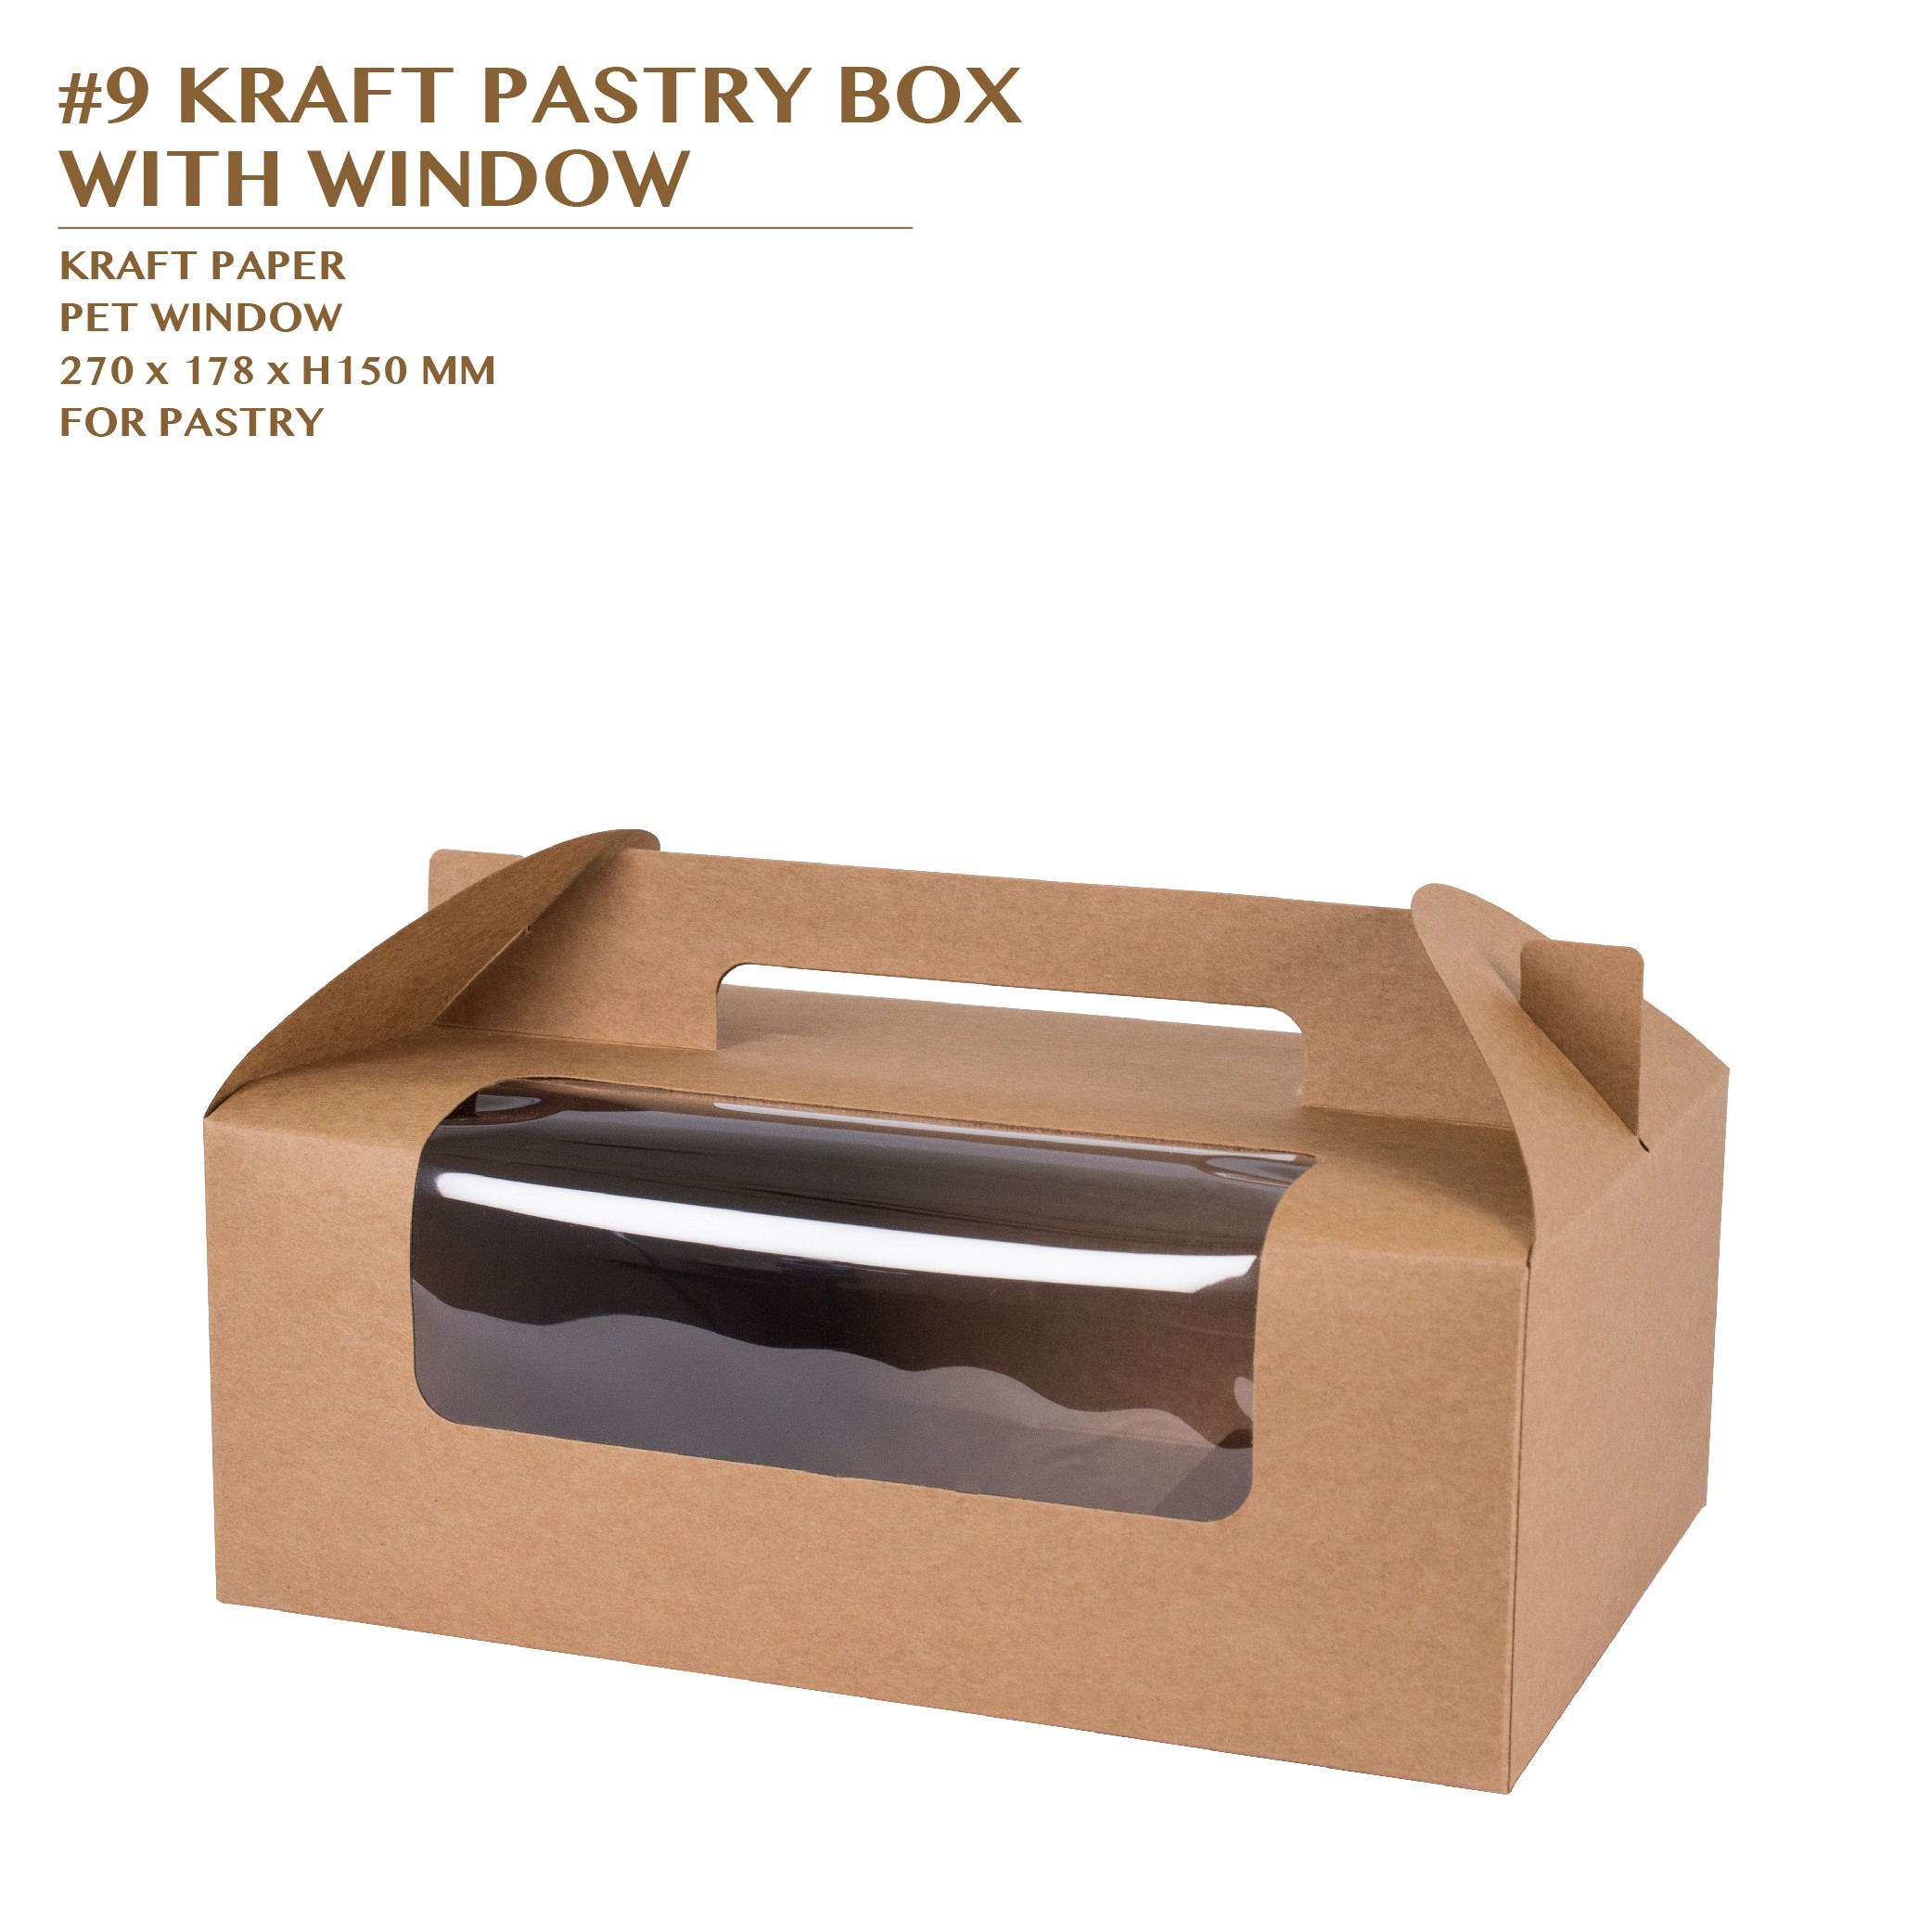 PRE-ORDER #9 KRAFT PASTRY BOX  WITH WINDOW